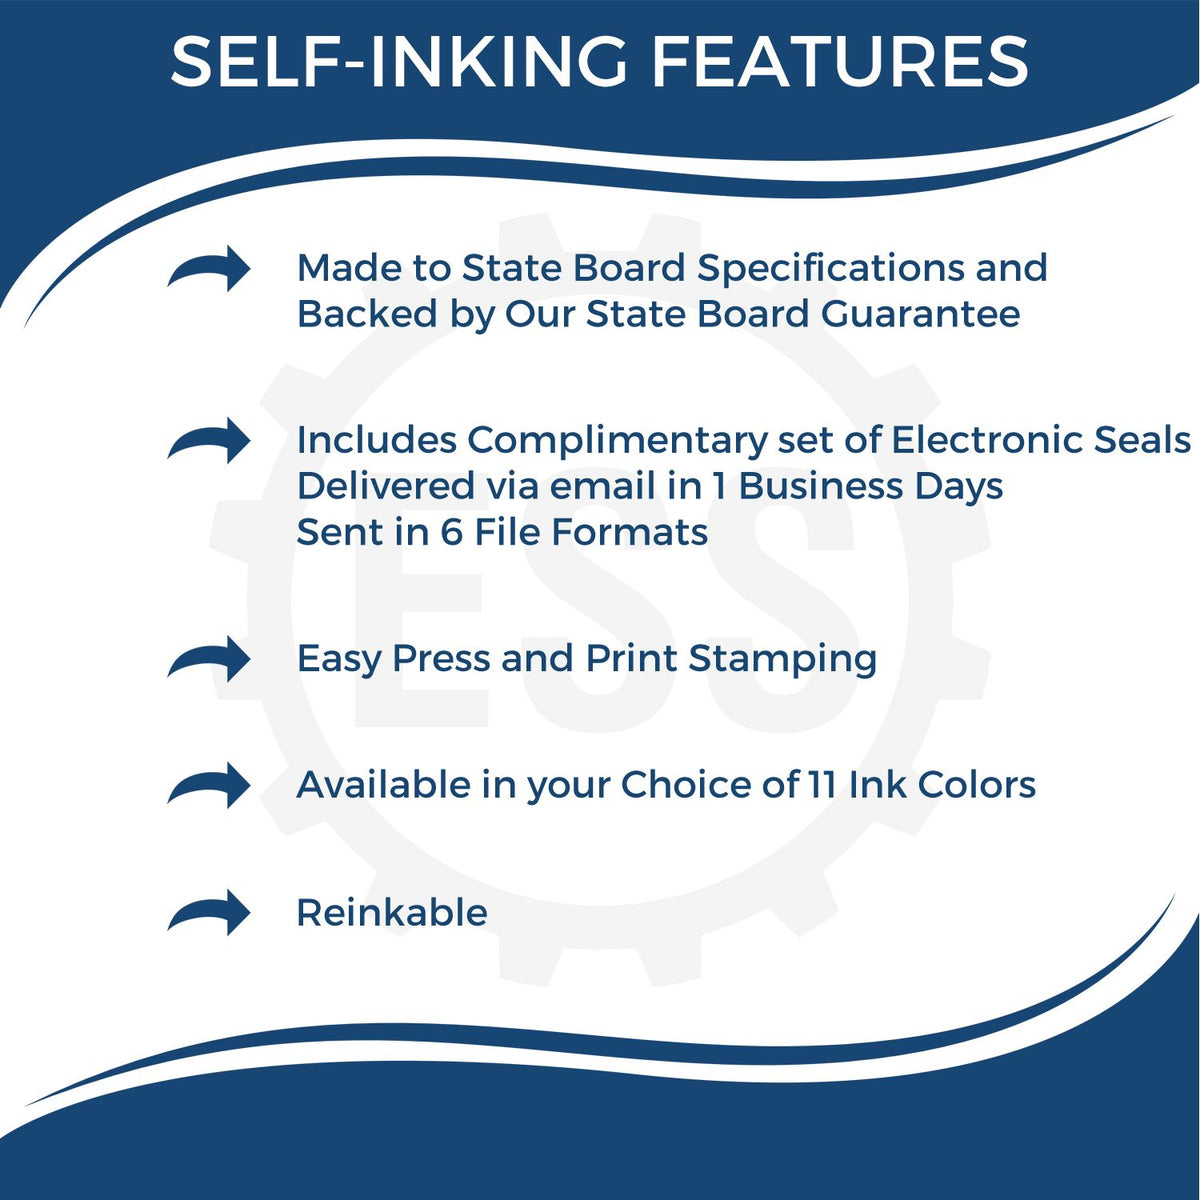 A picture of an infographic highlighting the selling points for the Self-Inking Alaska Geologist Stamp